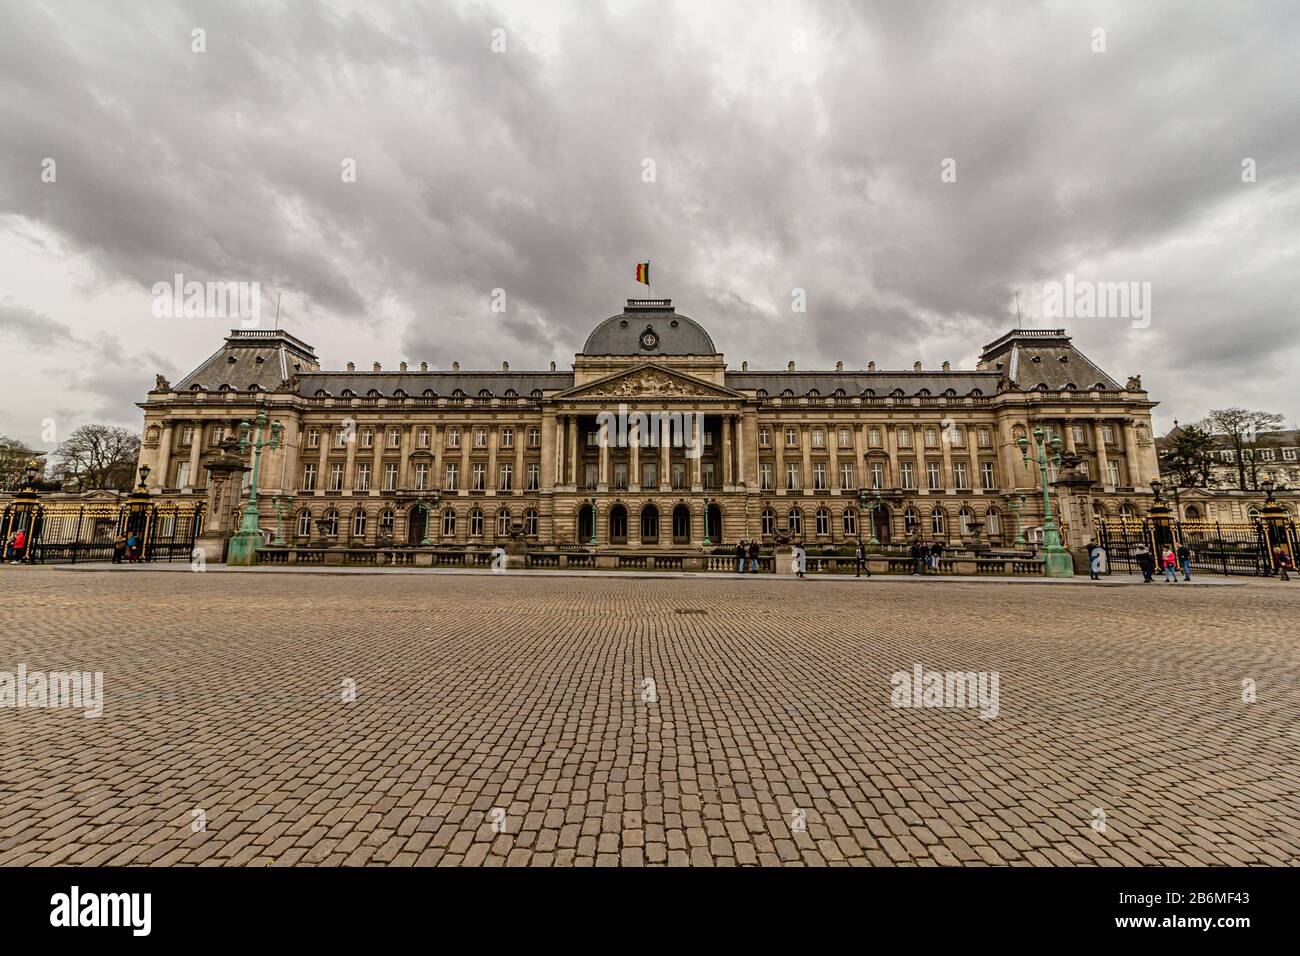 The Royal Palace of Brussels, used as the offices of the King and Queen of Belgium. Brussels, Belgium. March 2019. Stock Photo